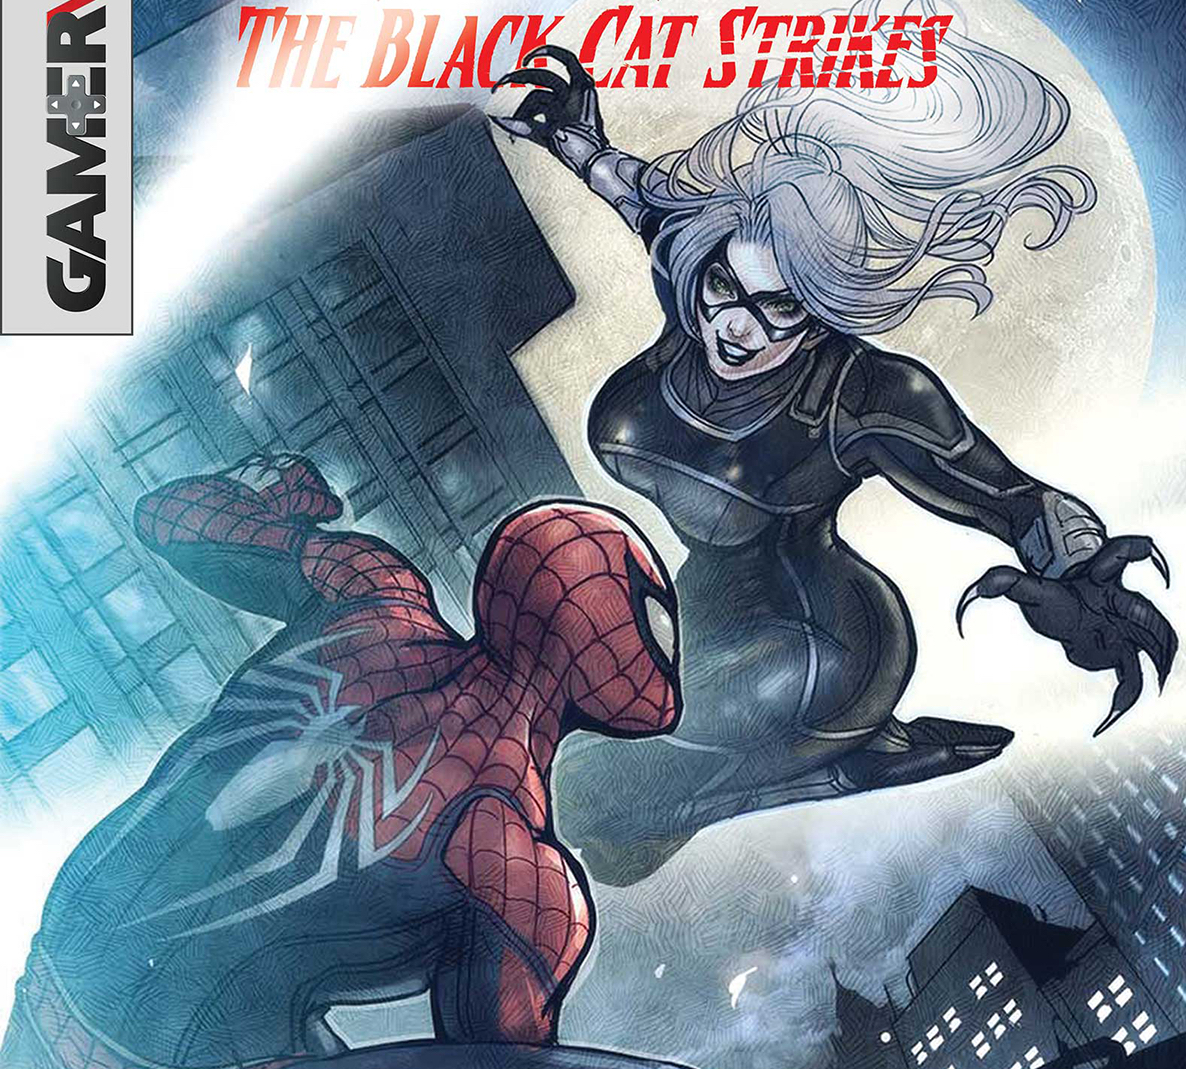 EXCLUSIVE Marvel Preview: Marvel's Spider-Man: The Black Cat Strikes #1